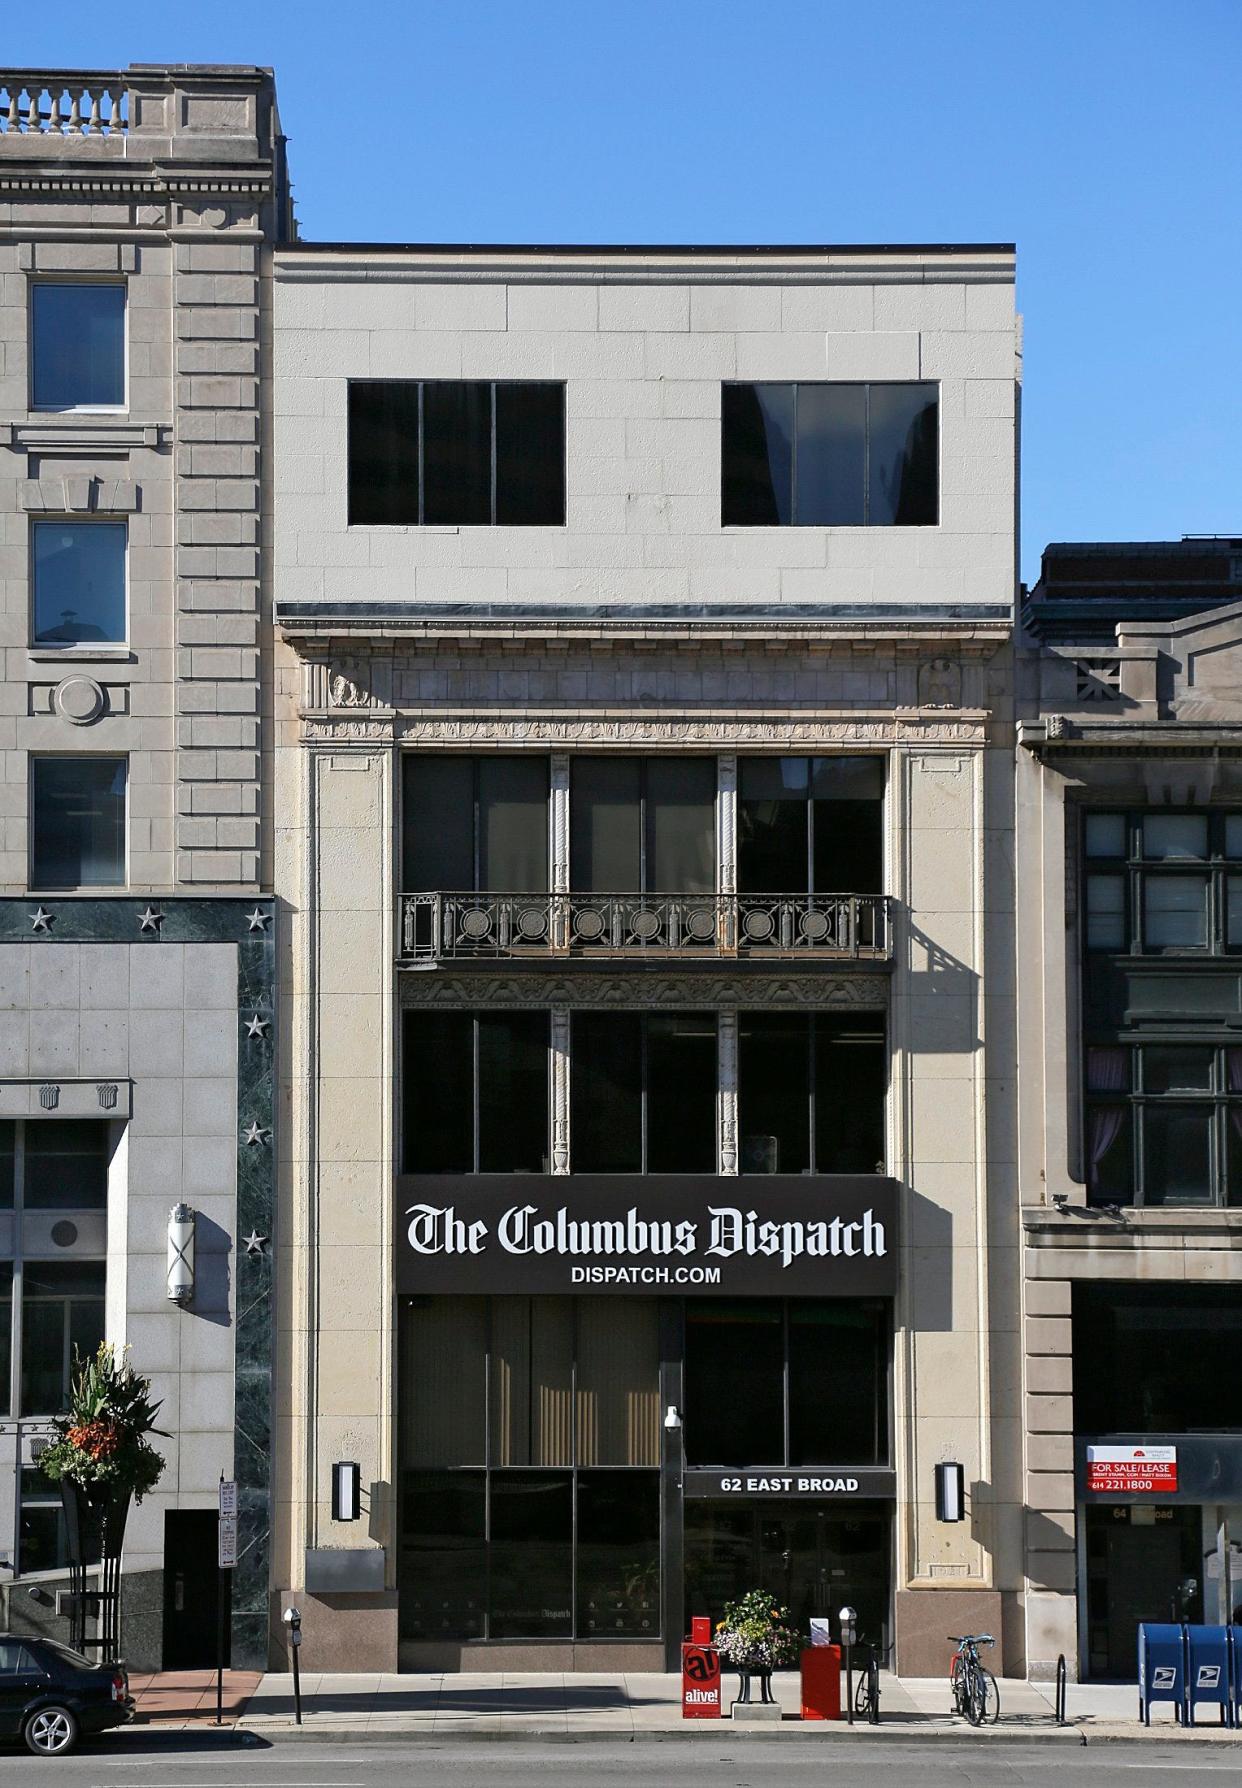 The Columbus Dispatch building at 62 E. Broad St. is in contract.